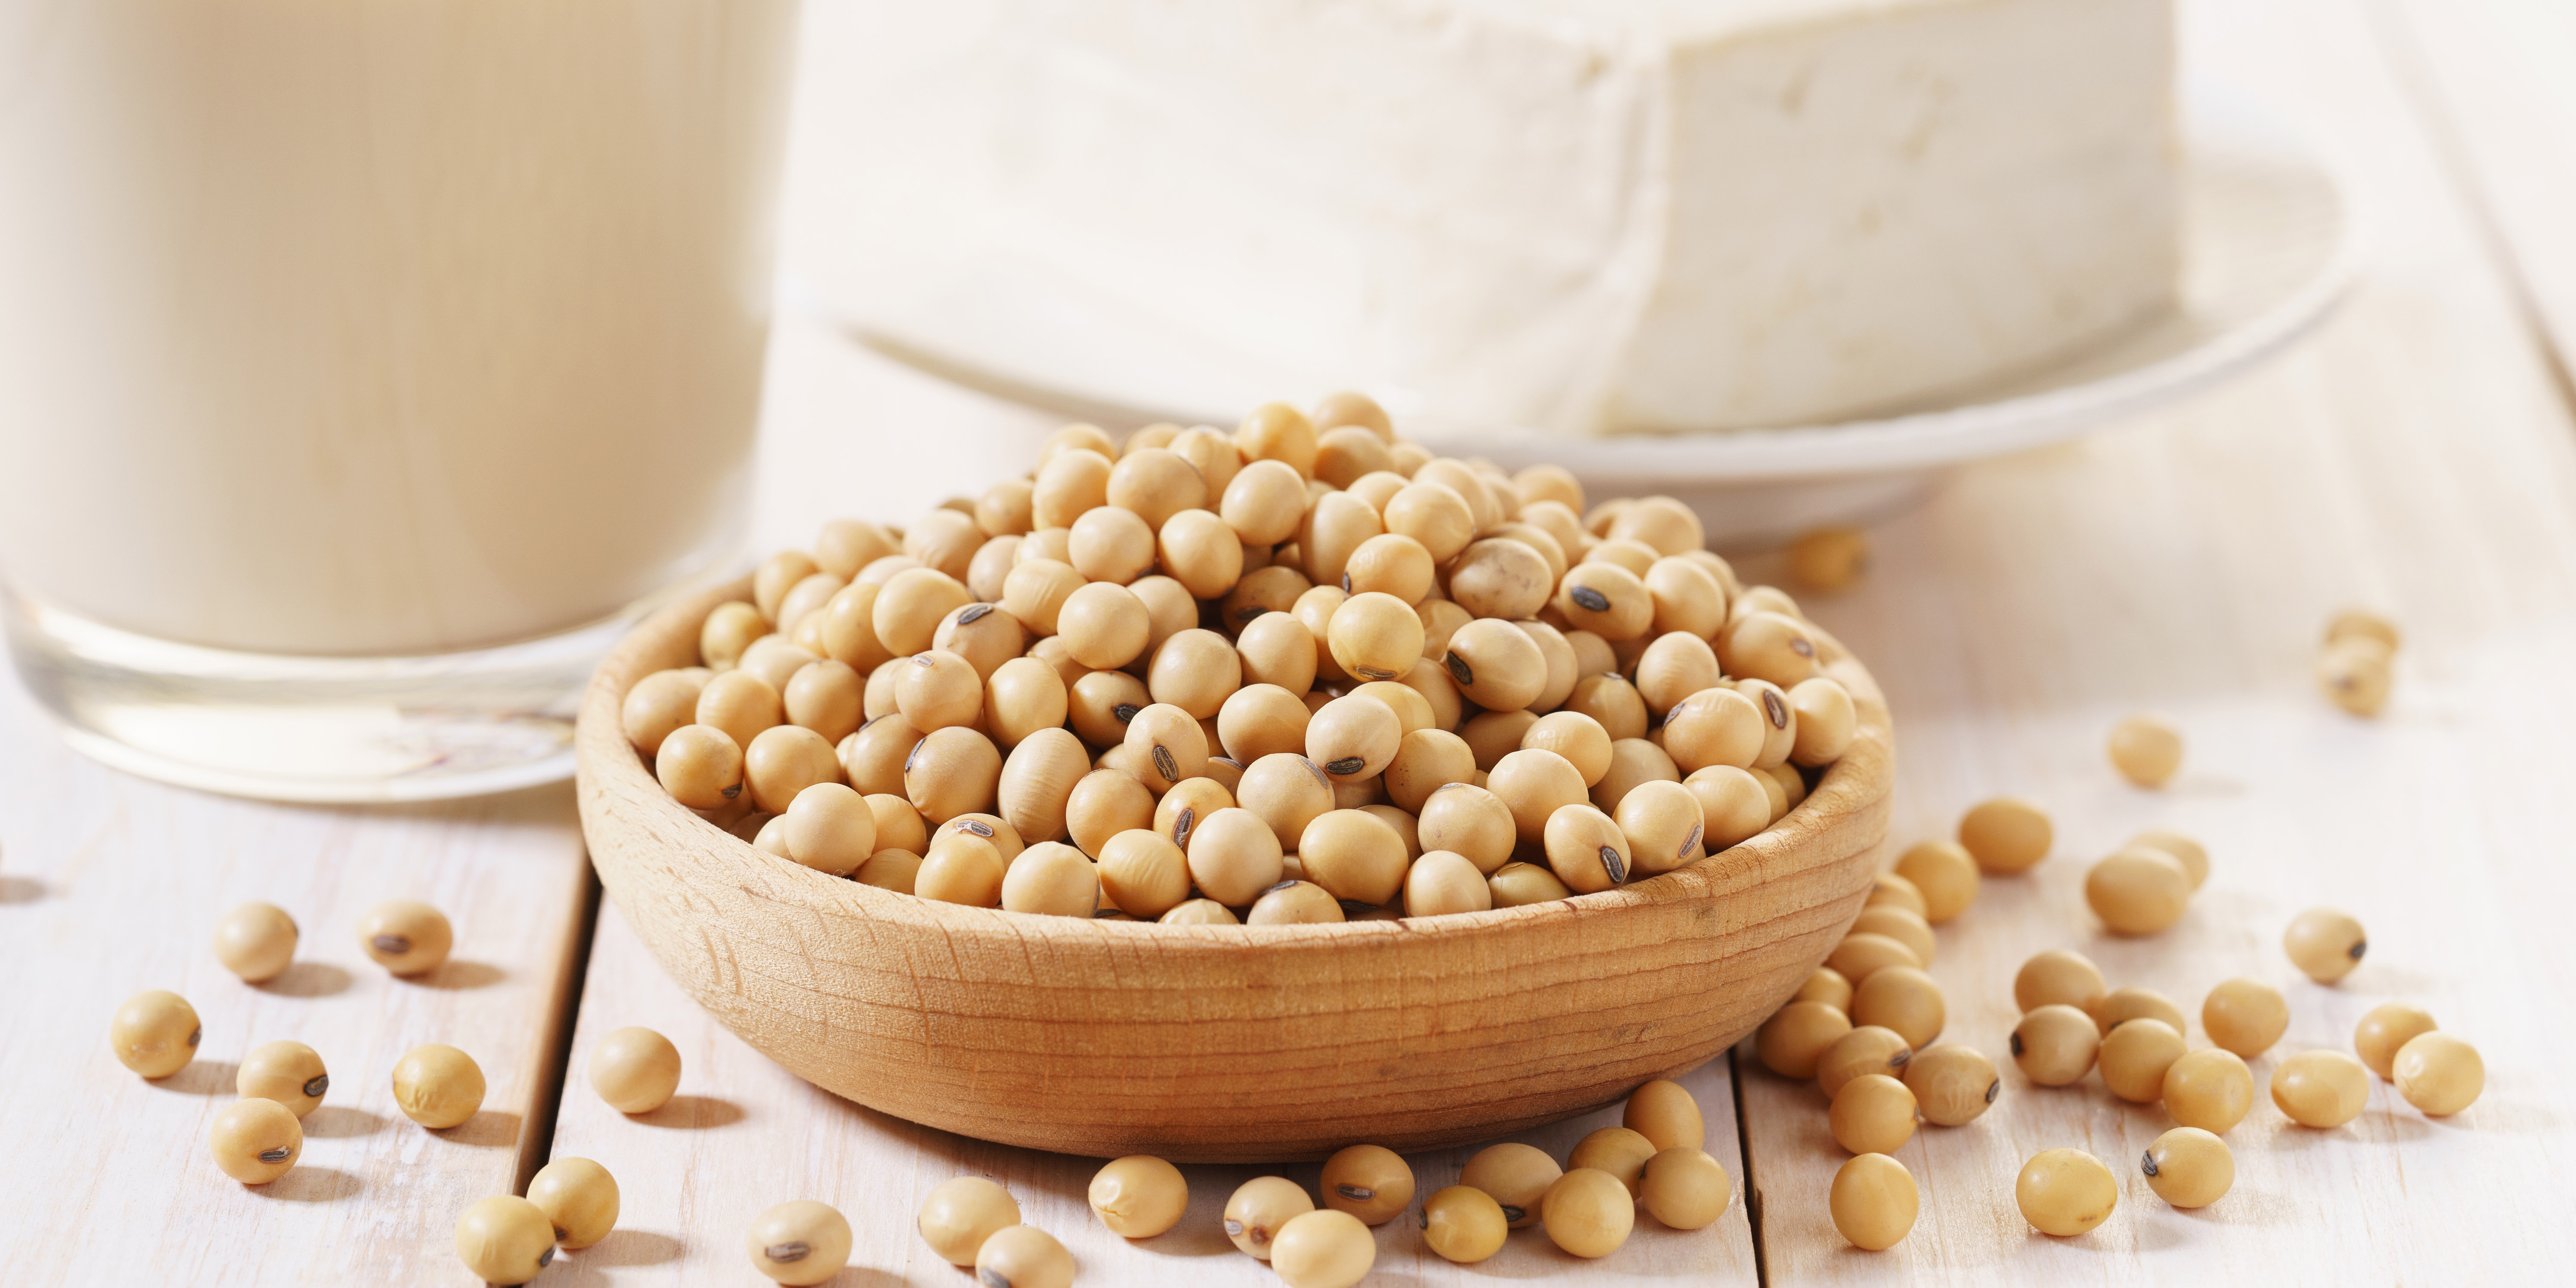 Is soy 'milk' good for you?